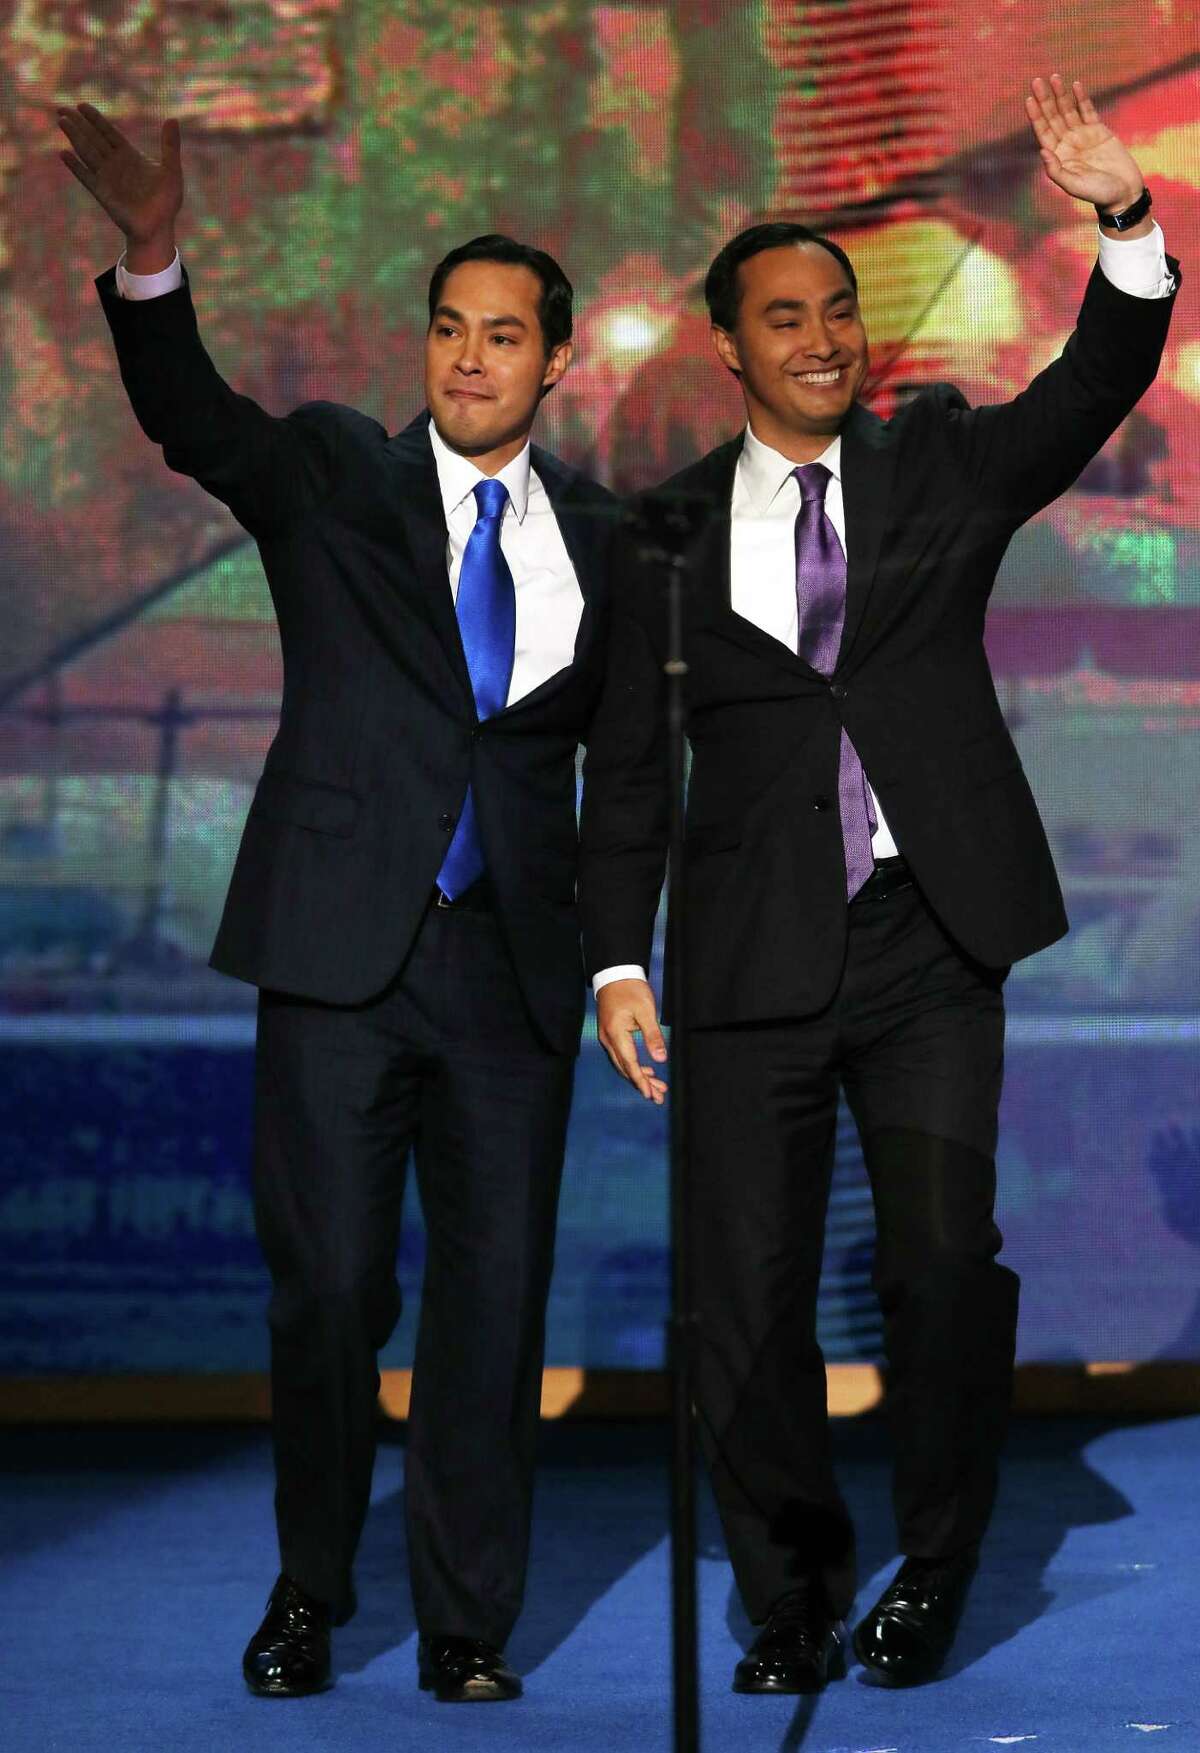 CHARLOTTE, NC - SEPTEMBER 04: State Rep. Joaquin Castro (D-TX)(R) waves with his brother San Antonio Mayor Julian Castro during day one of the Democratic National Convention at Time Warner Cable Arena on September 4, 2012 in Charlotte, North Carolina. The DNC that will run through September 7, will nominate U.S. President Barack Obama as the Democratic presidential candidate.